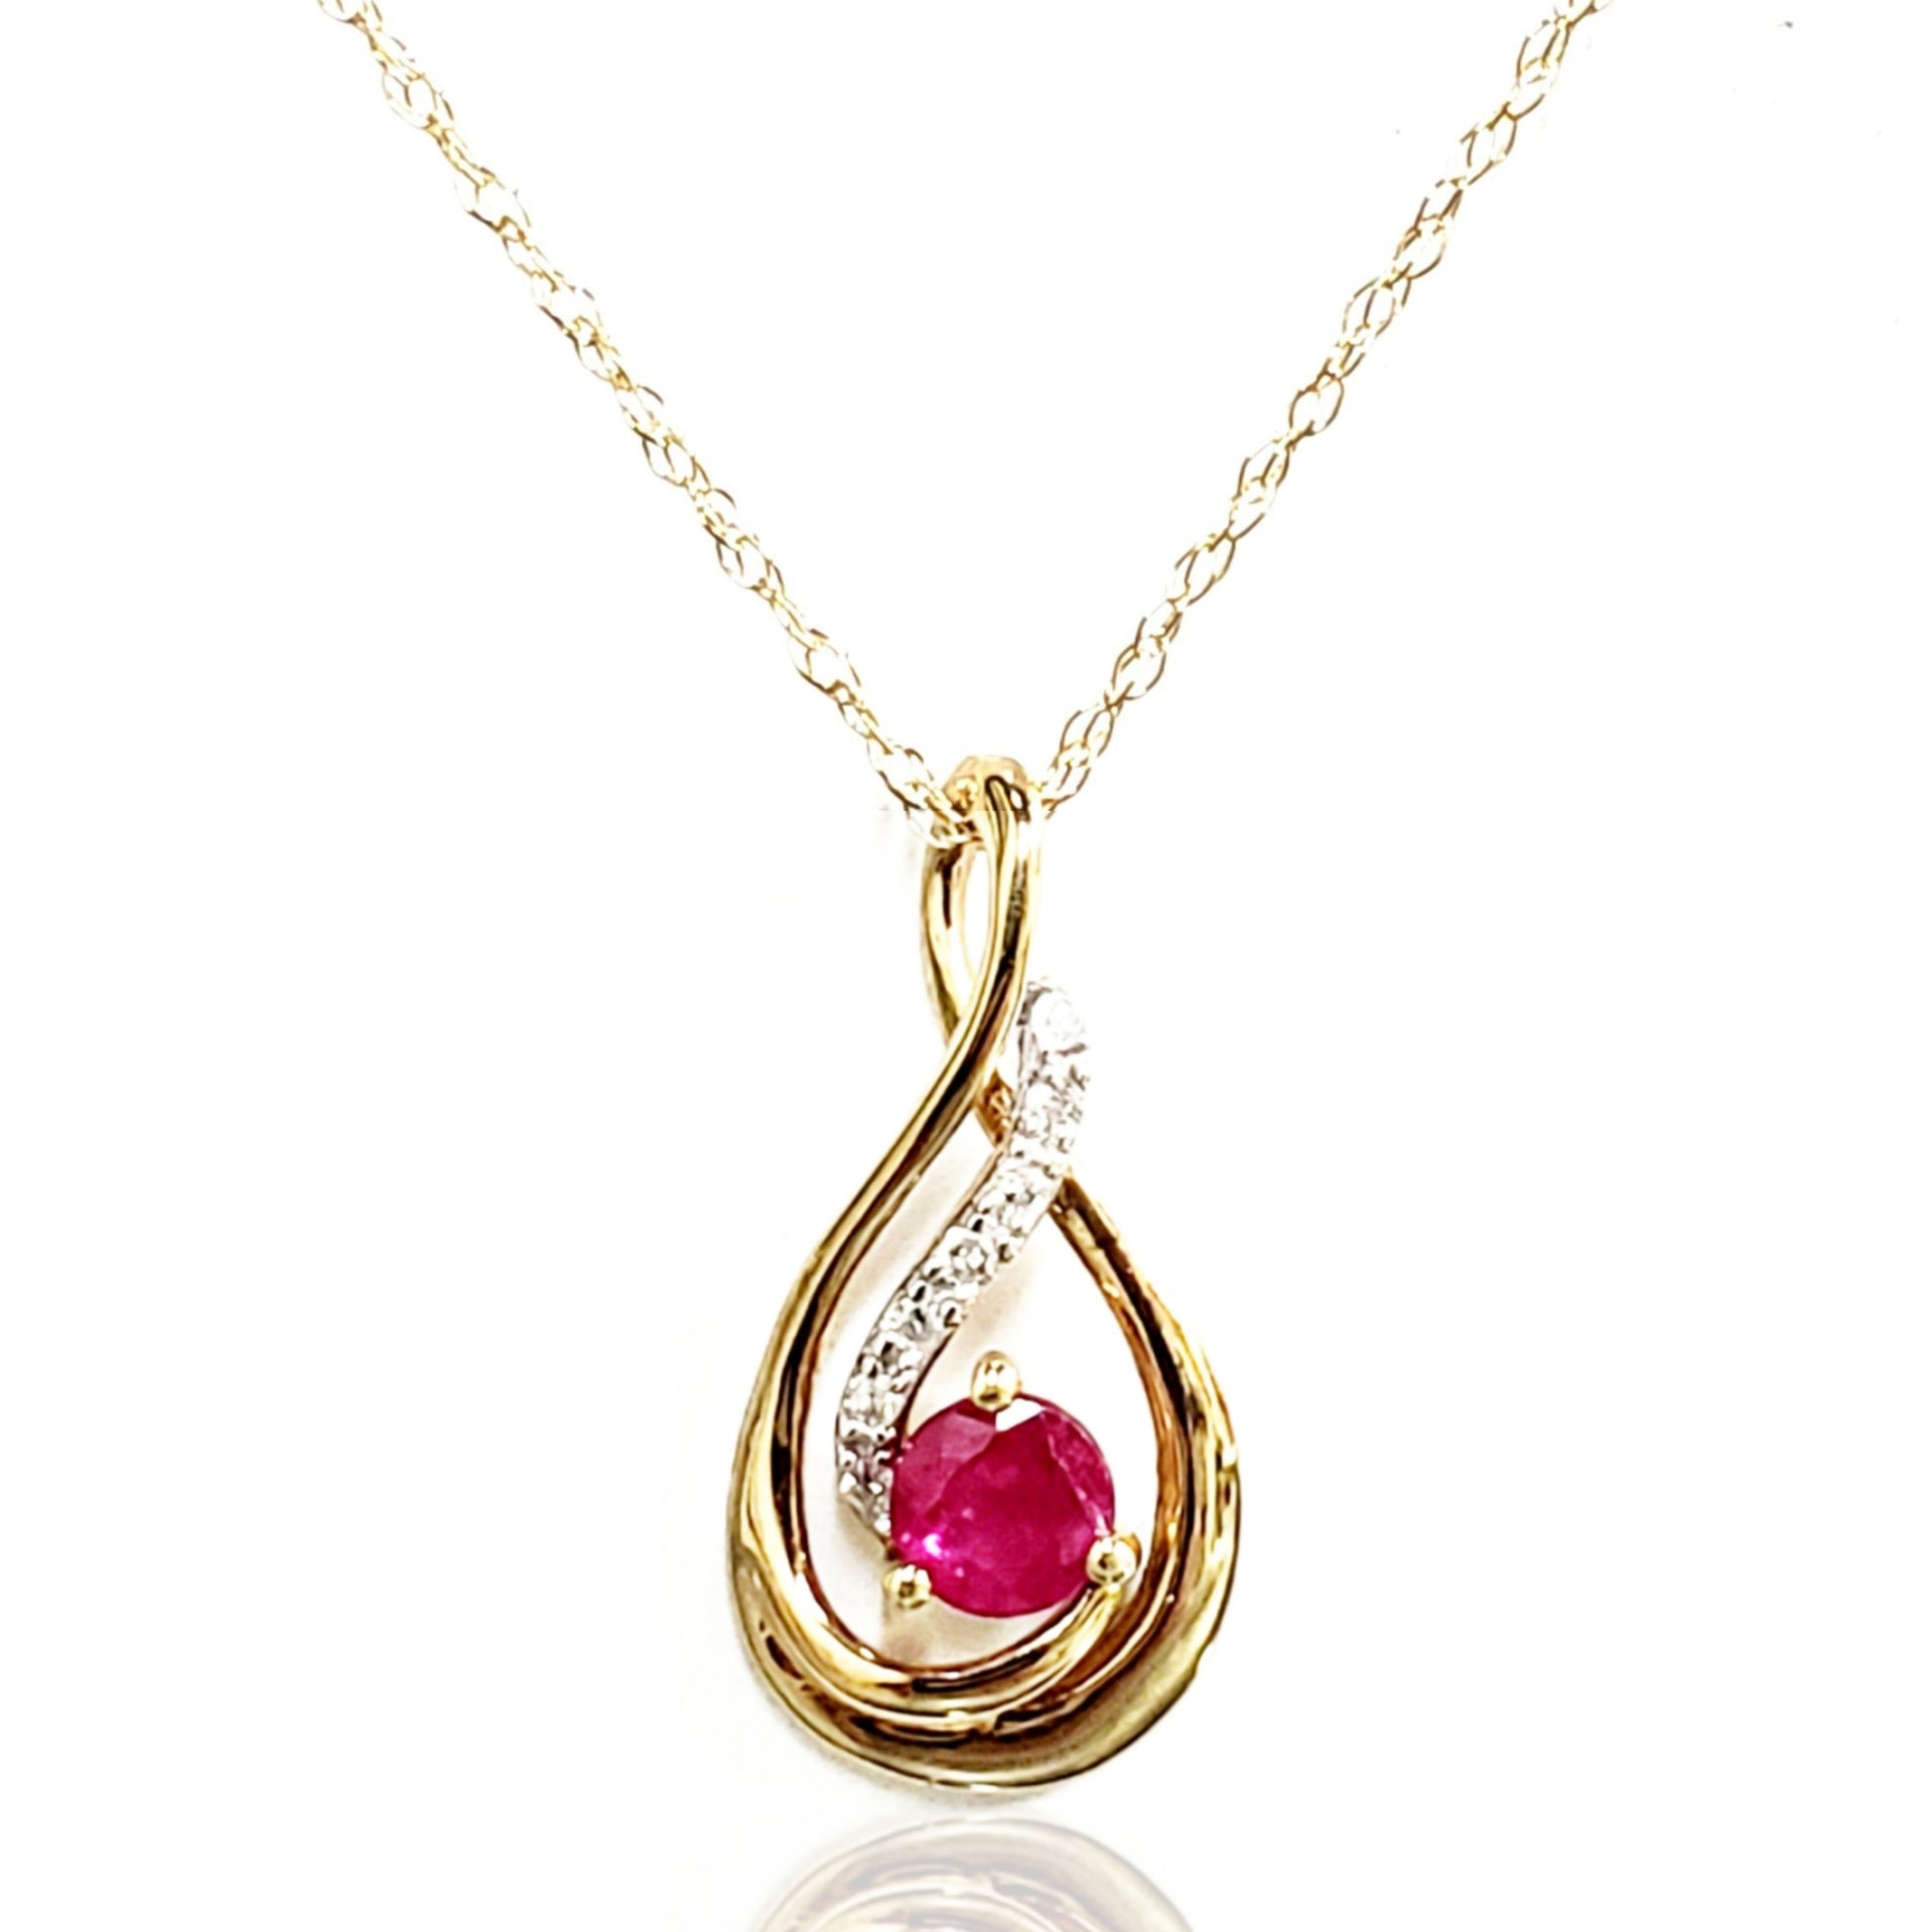 10k Gold, Diamond, And Ruby Pendant Necklace - HK Jewels